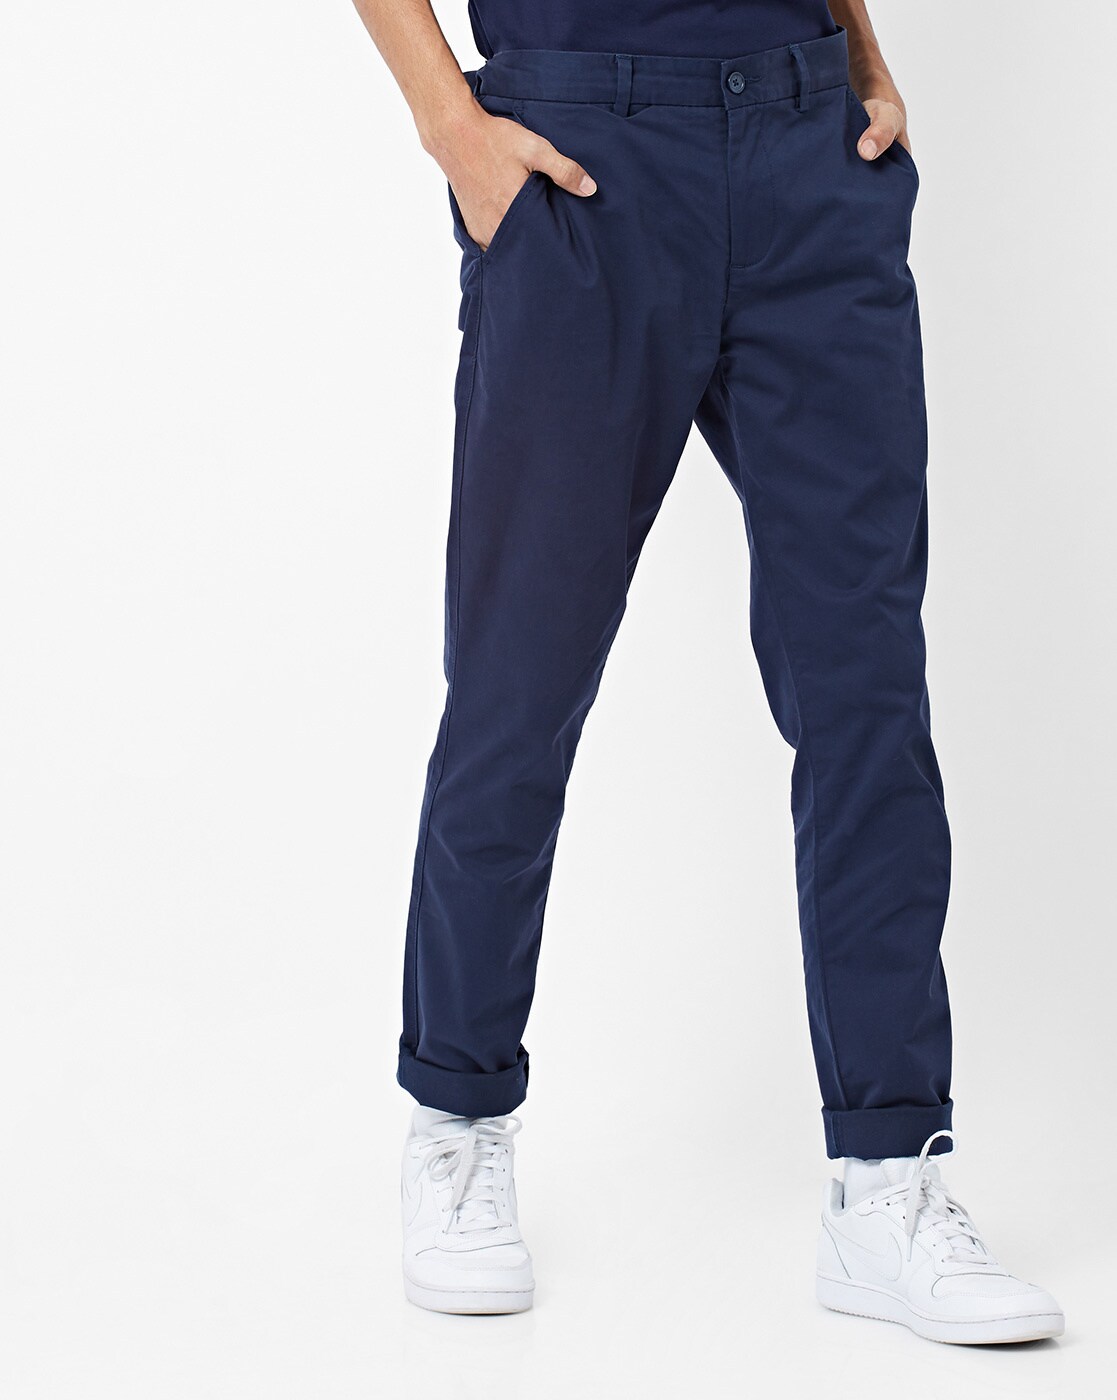 Buy Mens Suede Blue Color Trouser Tailorman Custom Made Ready To Wear  Trousers